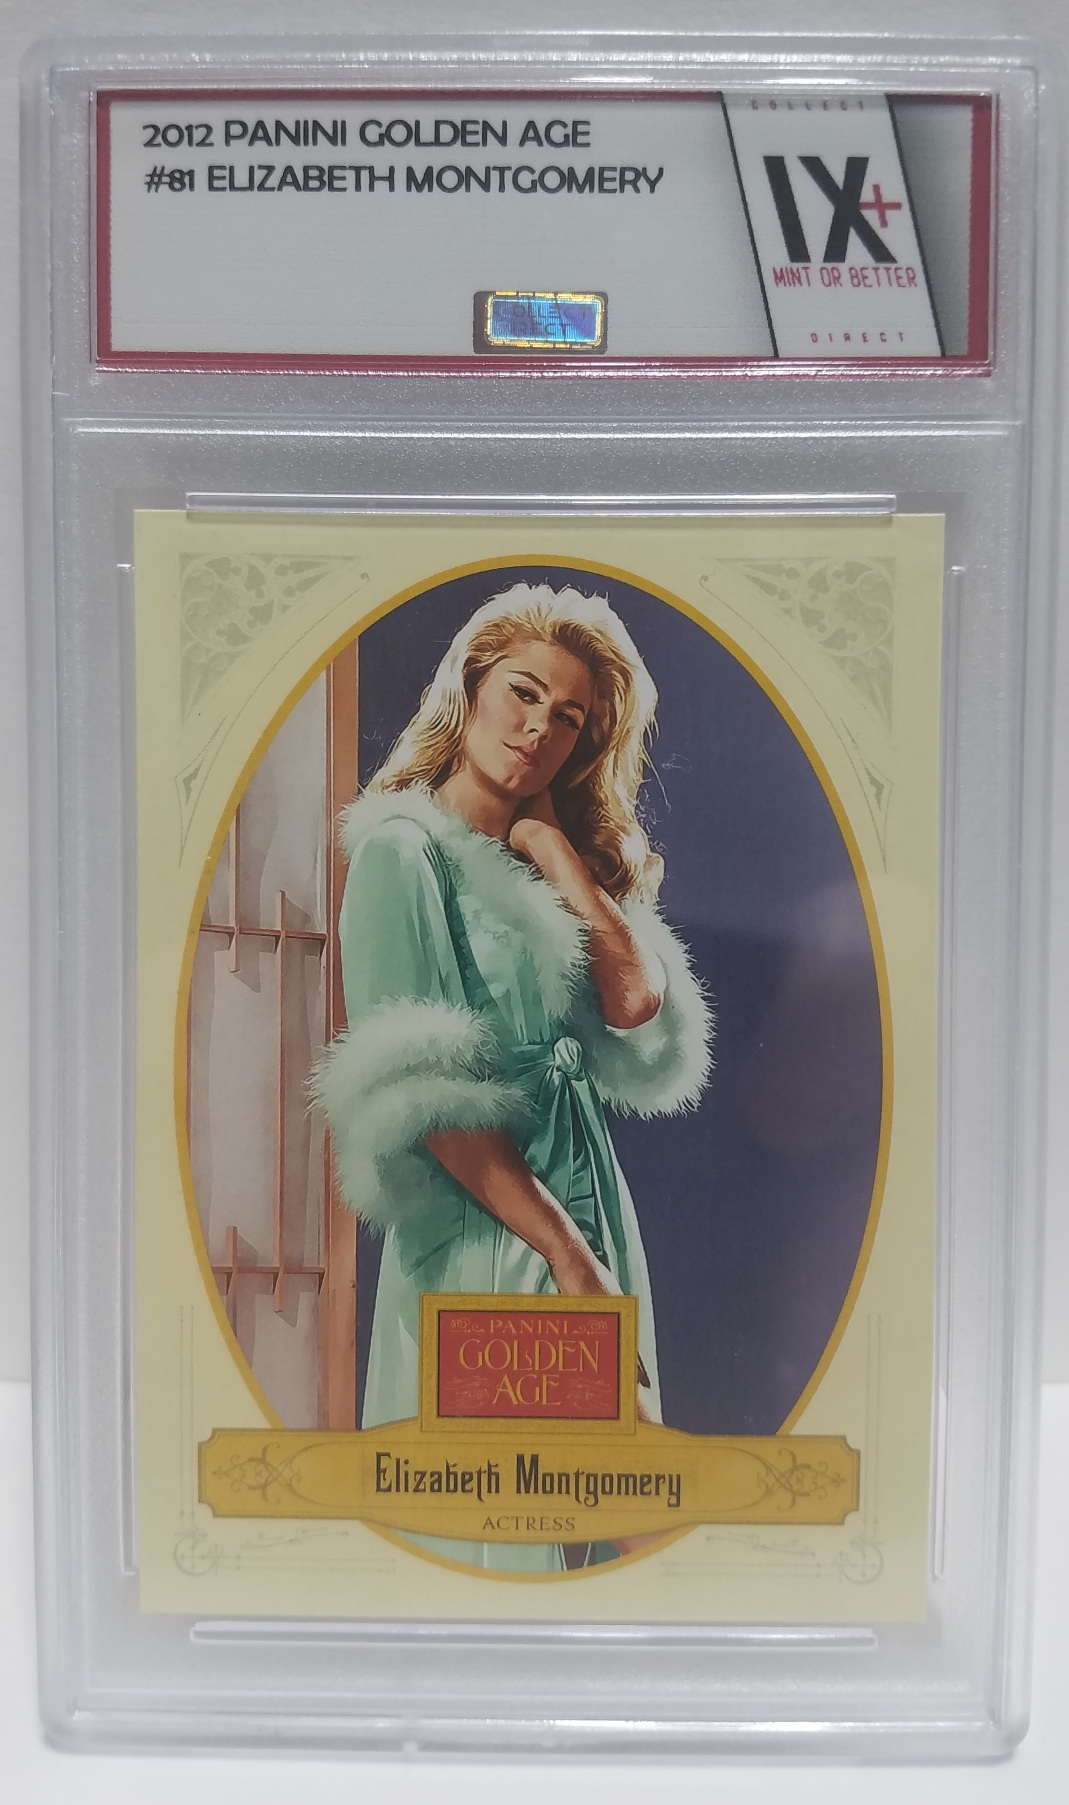 ELIZABETH MONTGOMERY 2012 Panini Golden Age #81 Collect Direct Graded Mint or Better Actress BEWITCHED